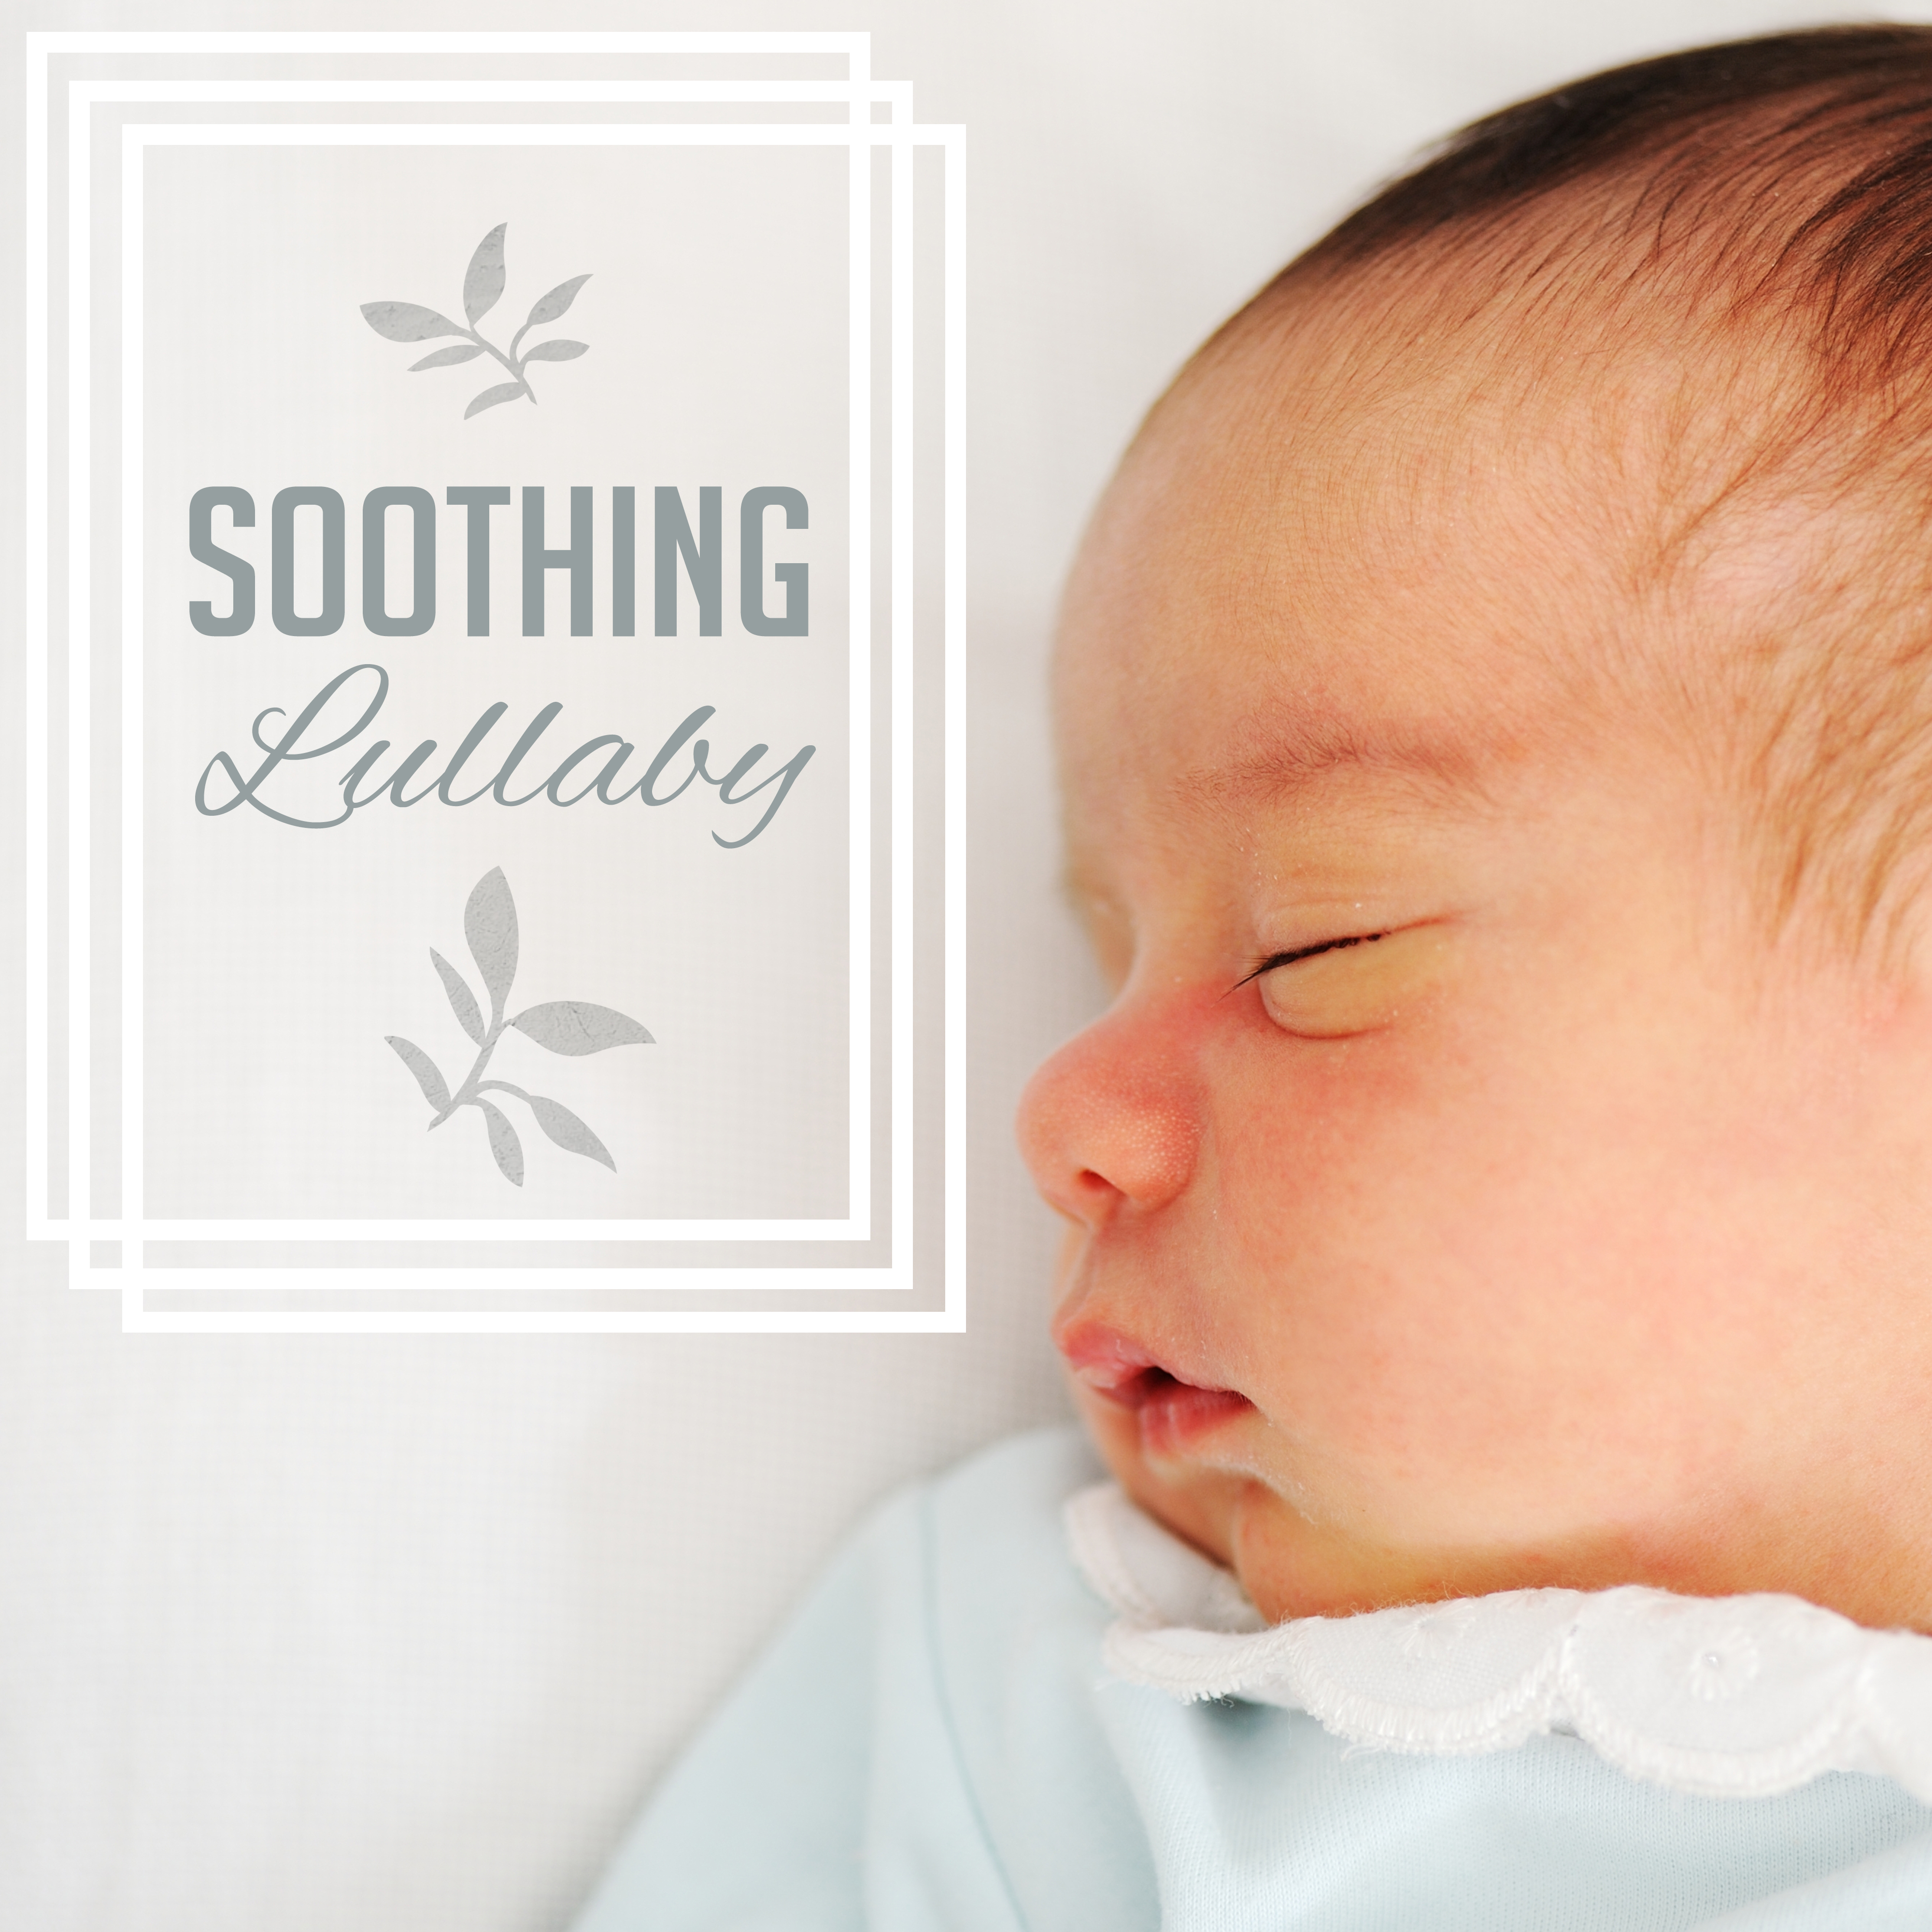 Soothing Lullaby  Peaceful Music for Baby, Restful Sleep, Cradle Songs, Naptime, Relax